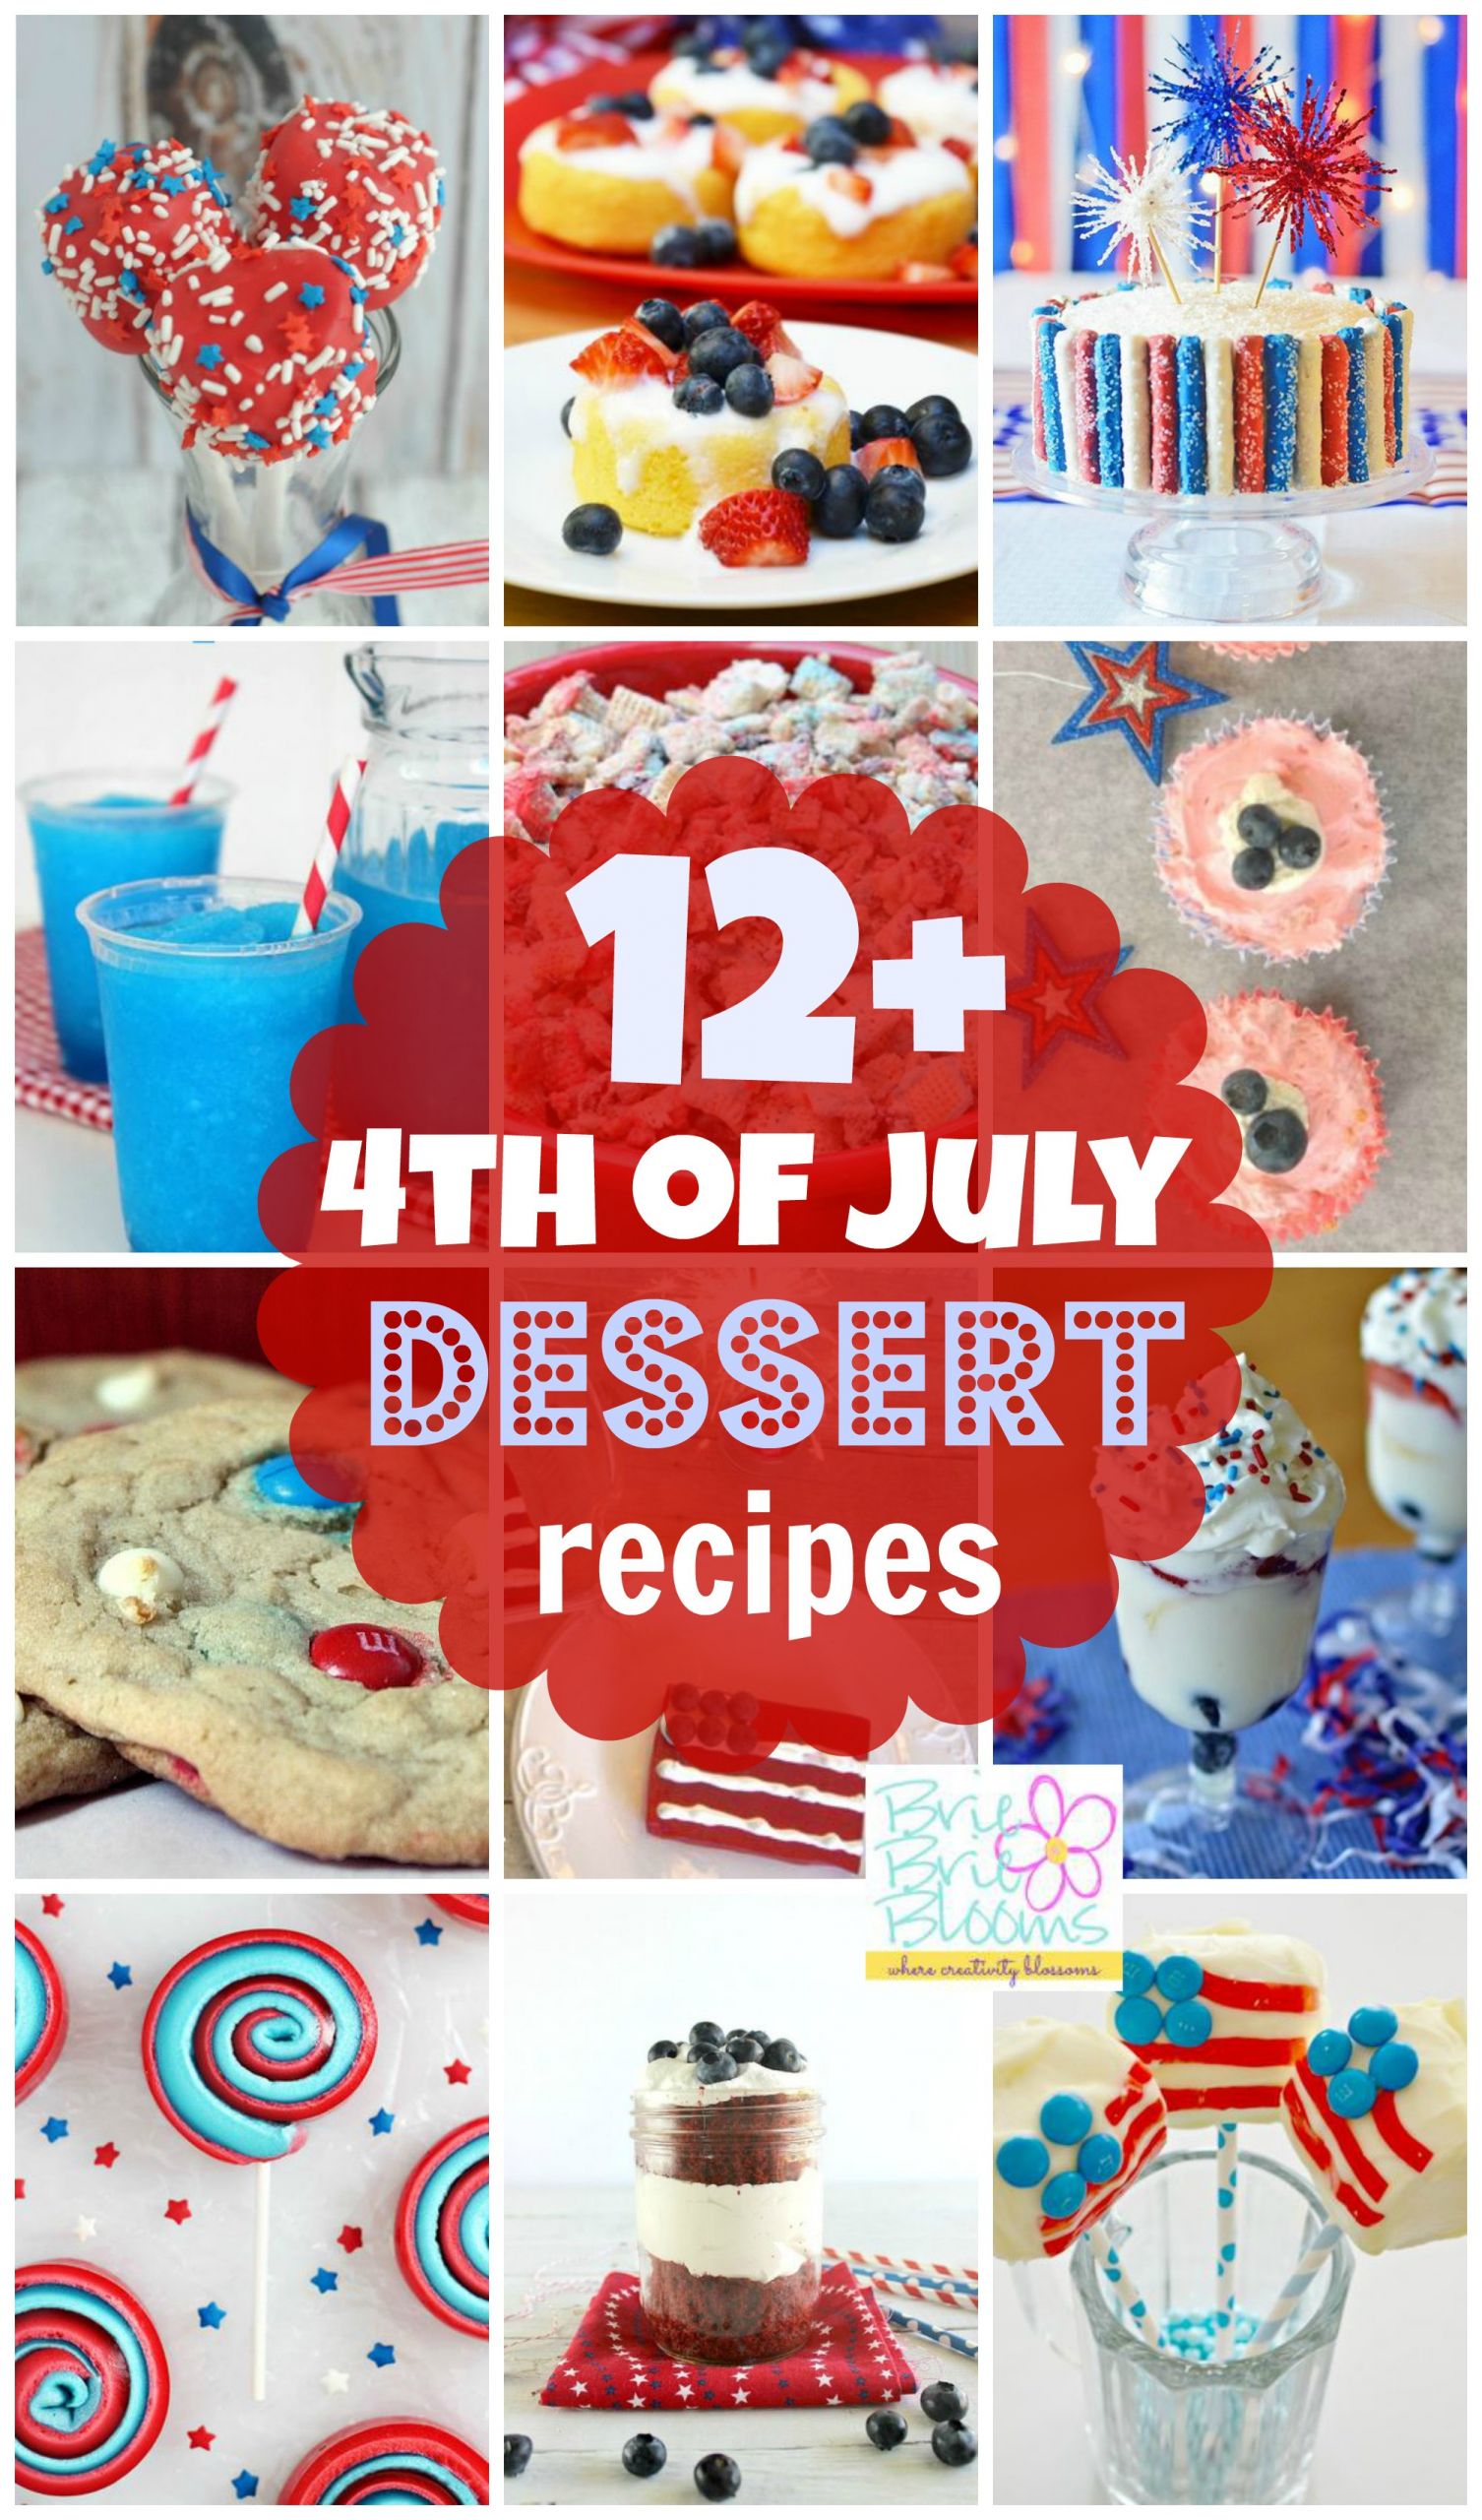 Quick And Easy Fourth Of July Desserts
 Fourth of July Dessert Recipes Brie Brie Blooms